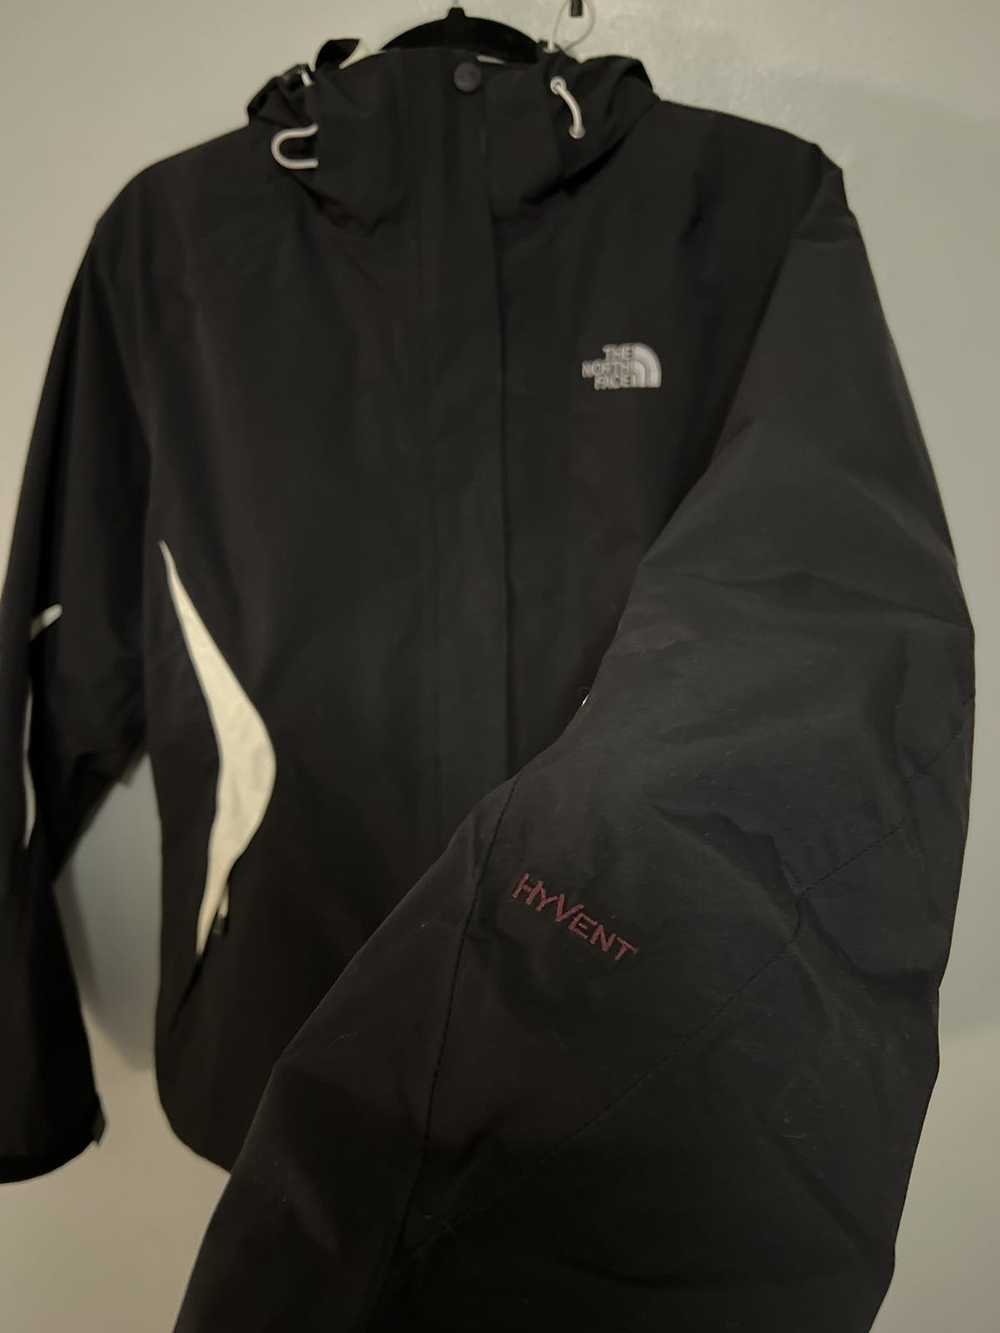 Vintage The North face Winter Jacket - image 3